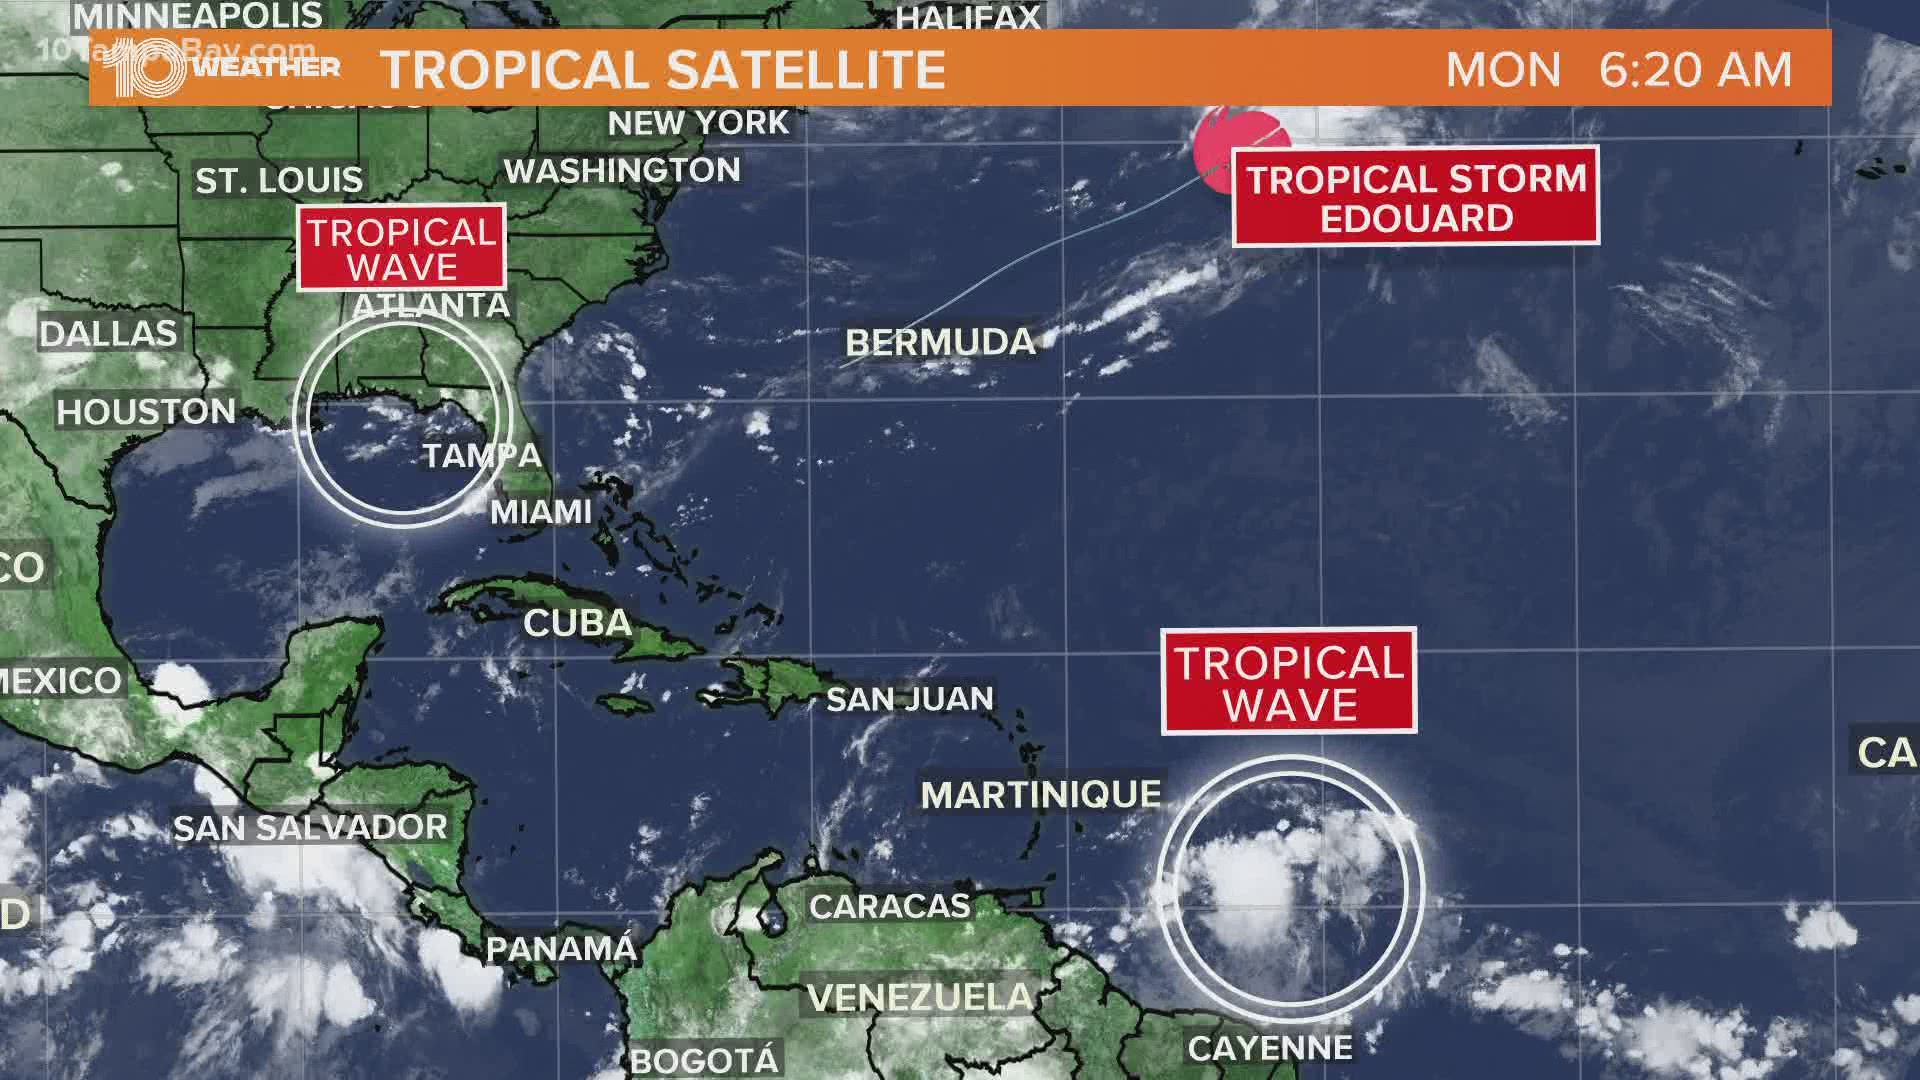 Tropical Storm Edouard became the 5th named storm of the 2020 hurricane season, but has been moving far from Florida. NHC is also tracking 2 other disturbances.